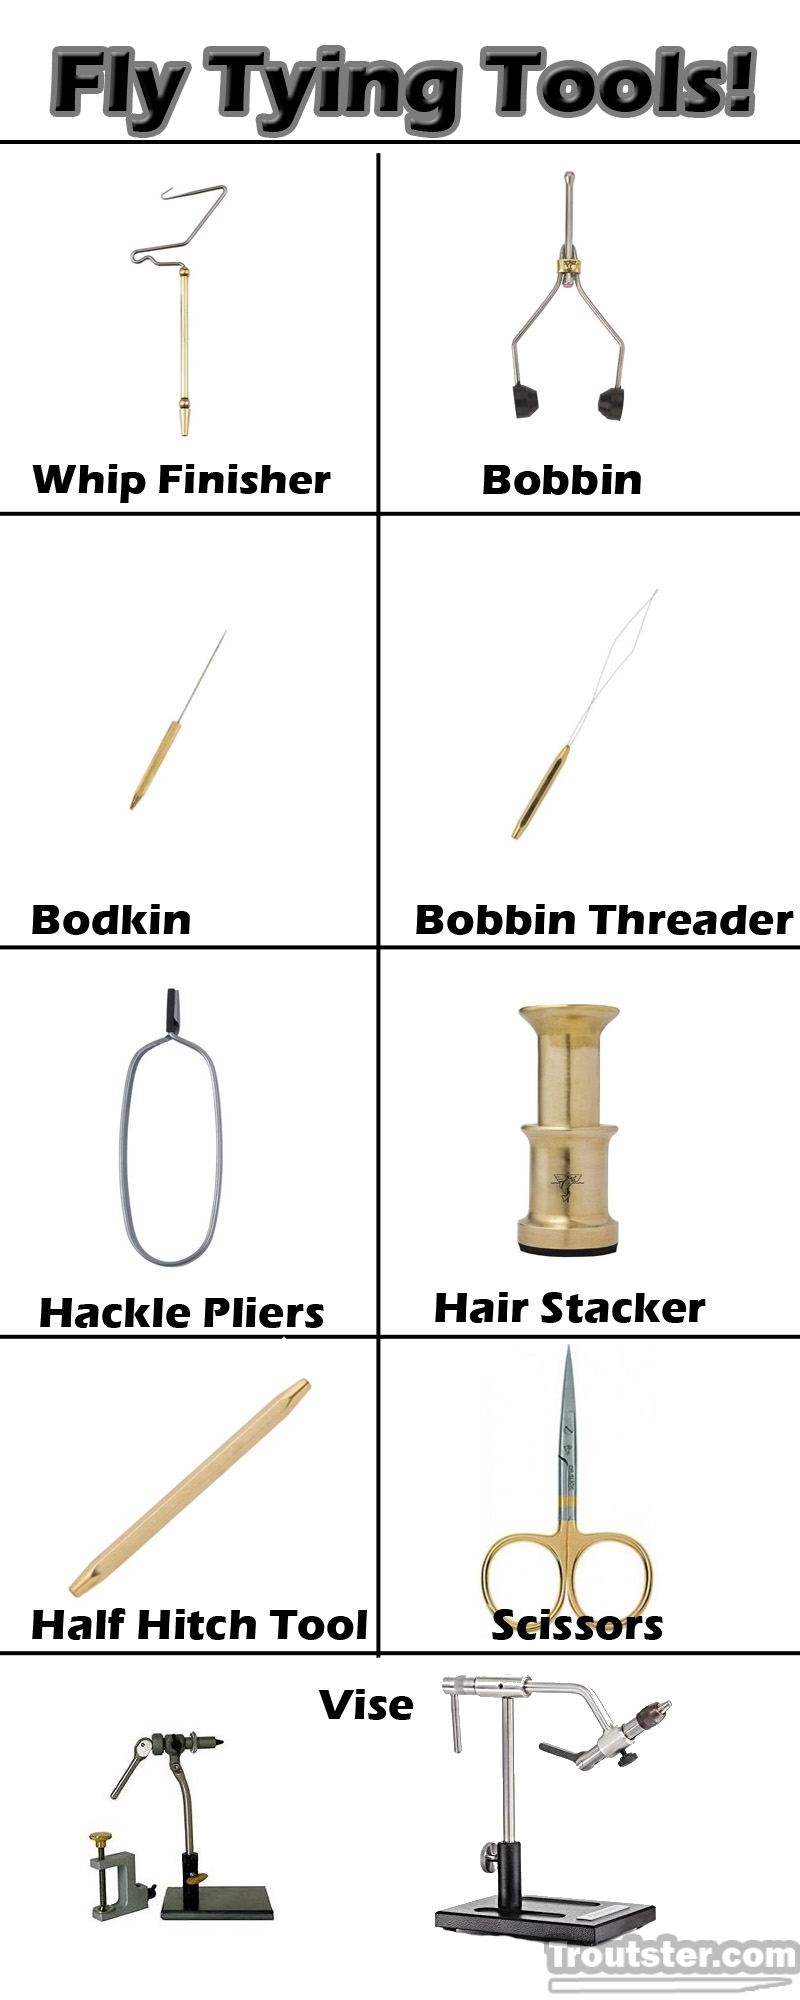 https://troutster.com/wp-content/uploads/Tools-used-in-fly-tying1.jpg?ezimgfmt=rs:0x0/rscb1/ngcb1/notWebP